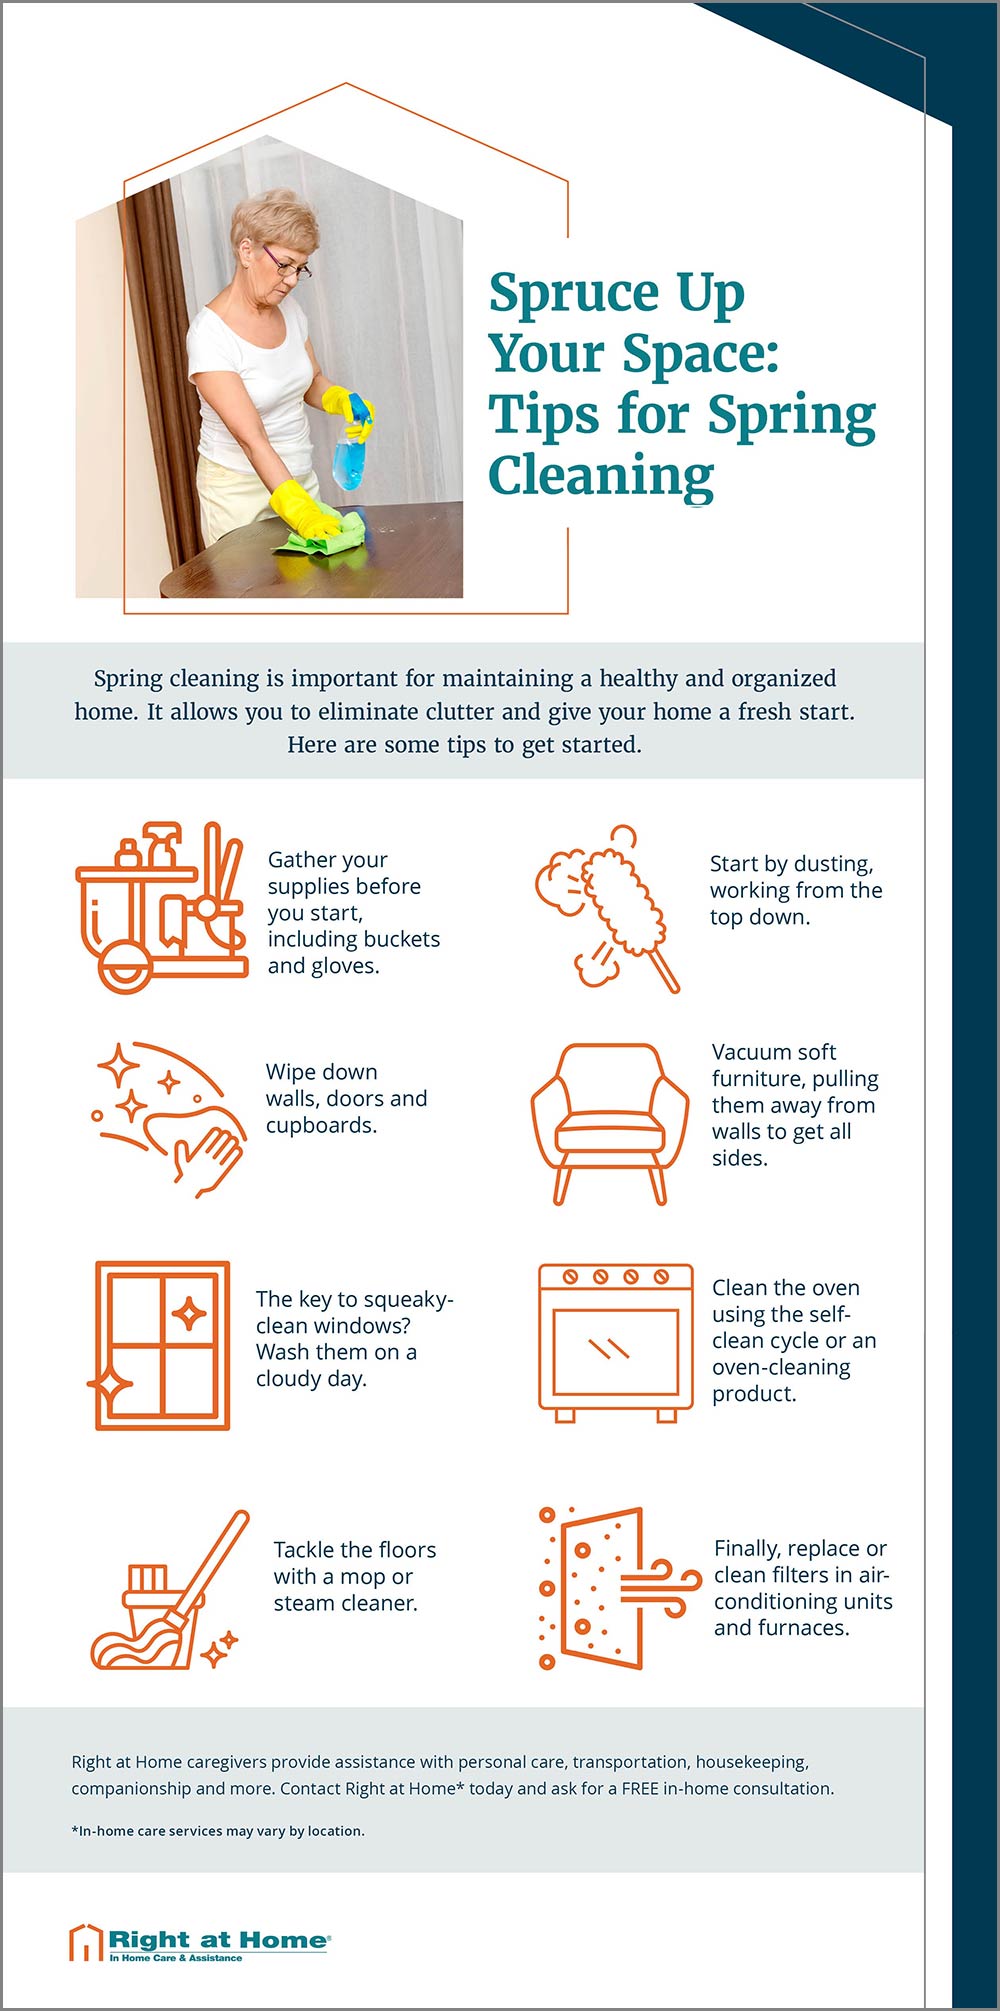 tips-for-spring-cleaning-infographic-right-at-home